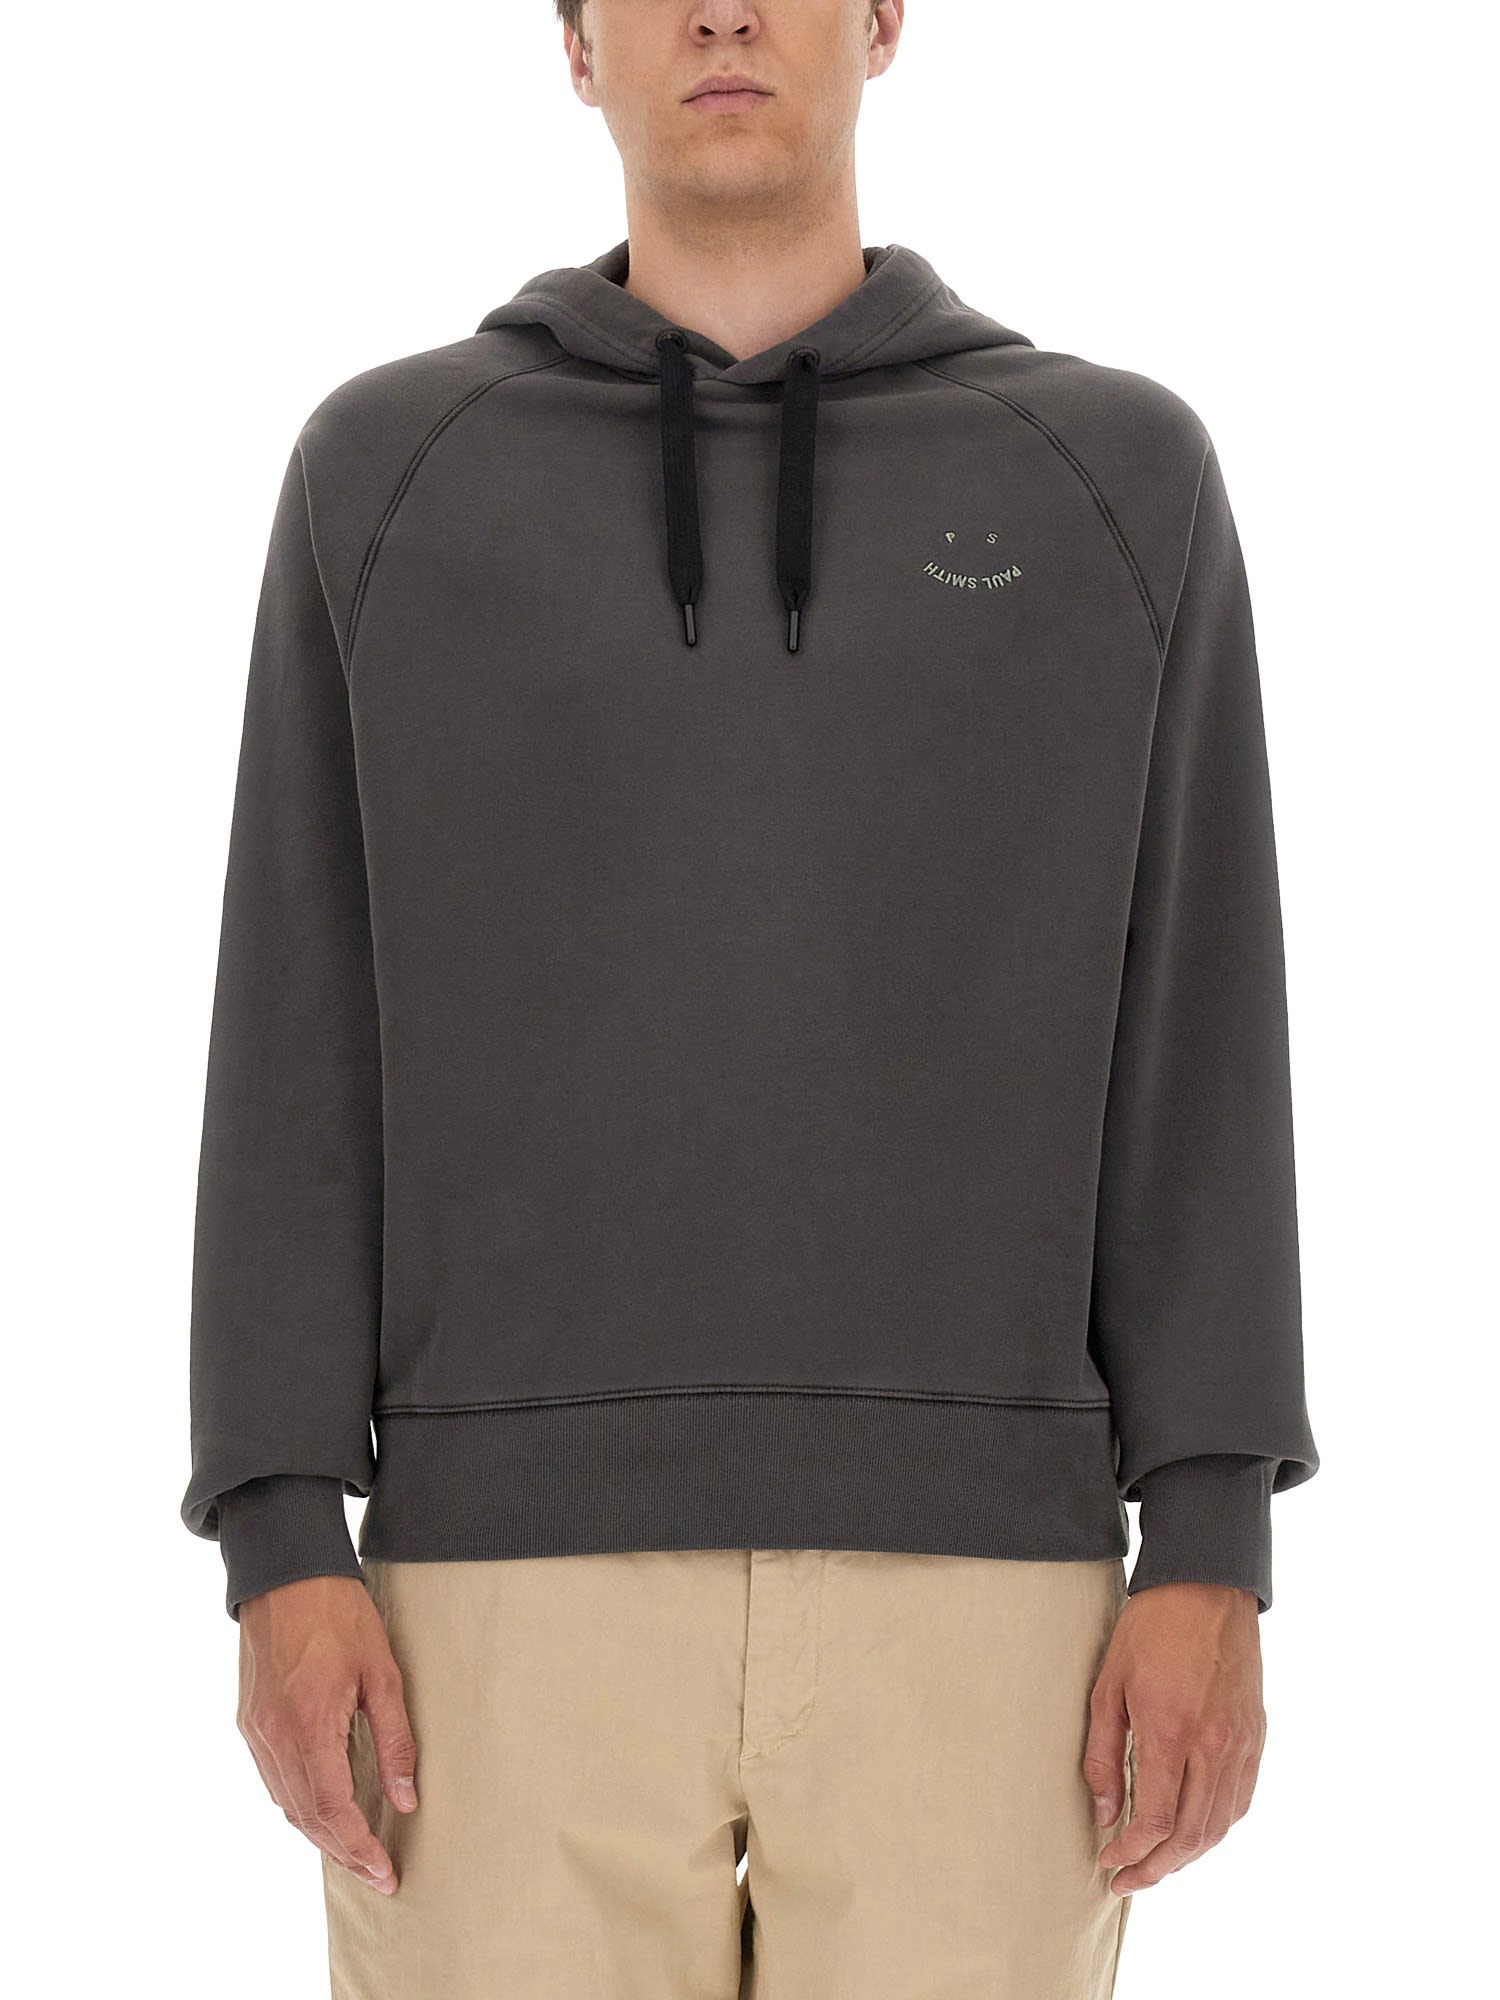 PS BY PAUL SMITH SWEATSHIRT WITH LOGO